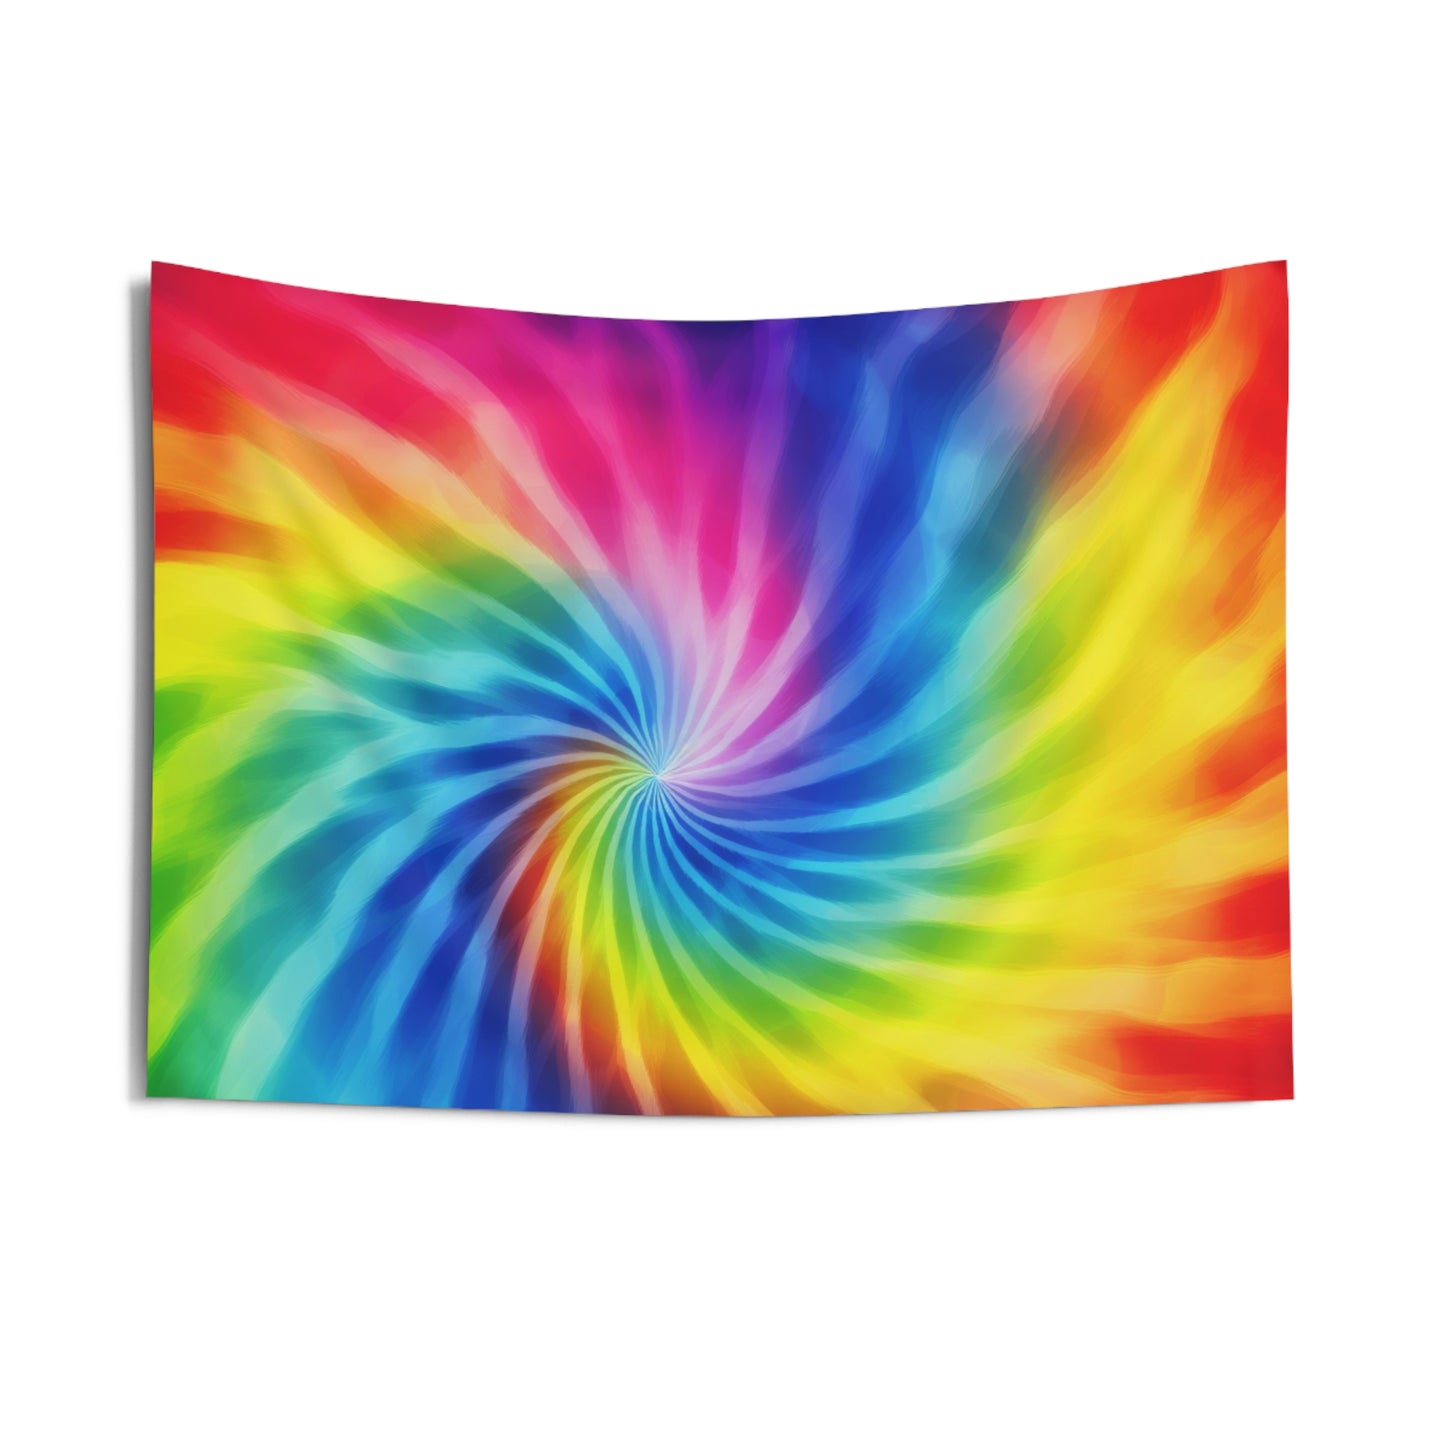 Rainbow Tie Dye Tapestry, Wall Art Hanging Landscape Indoor Aesthetic Large Small Decor Bedroom College Dorm Room Starcove Fashion